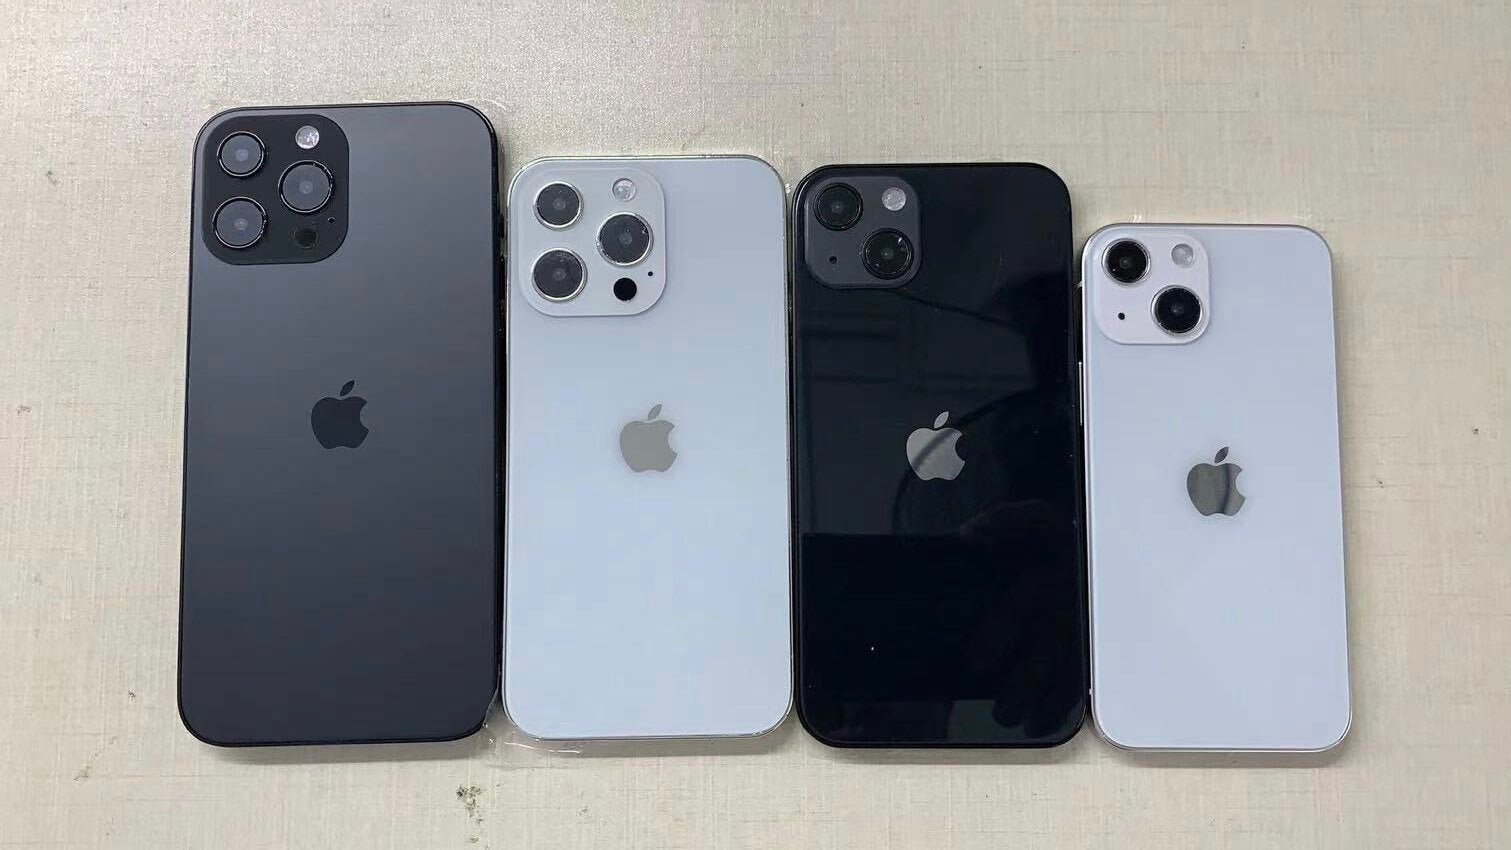 iPhone 13 family dummy units smile for the camera